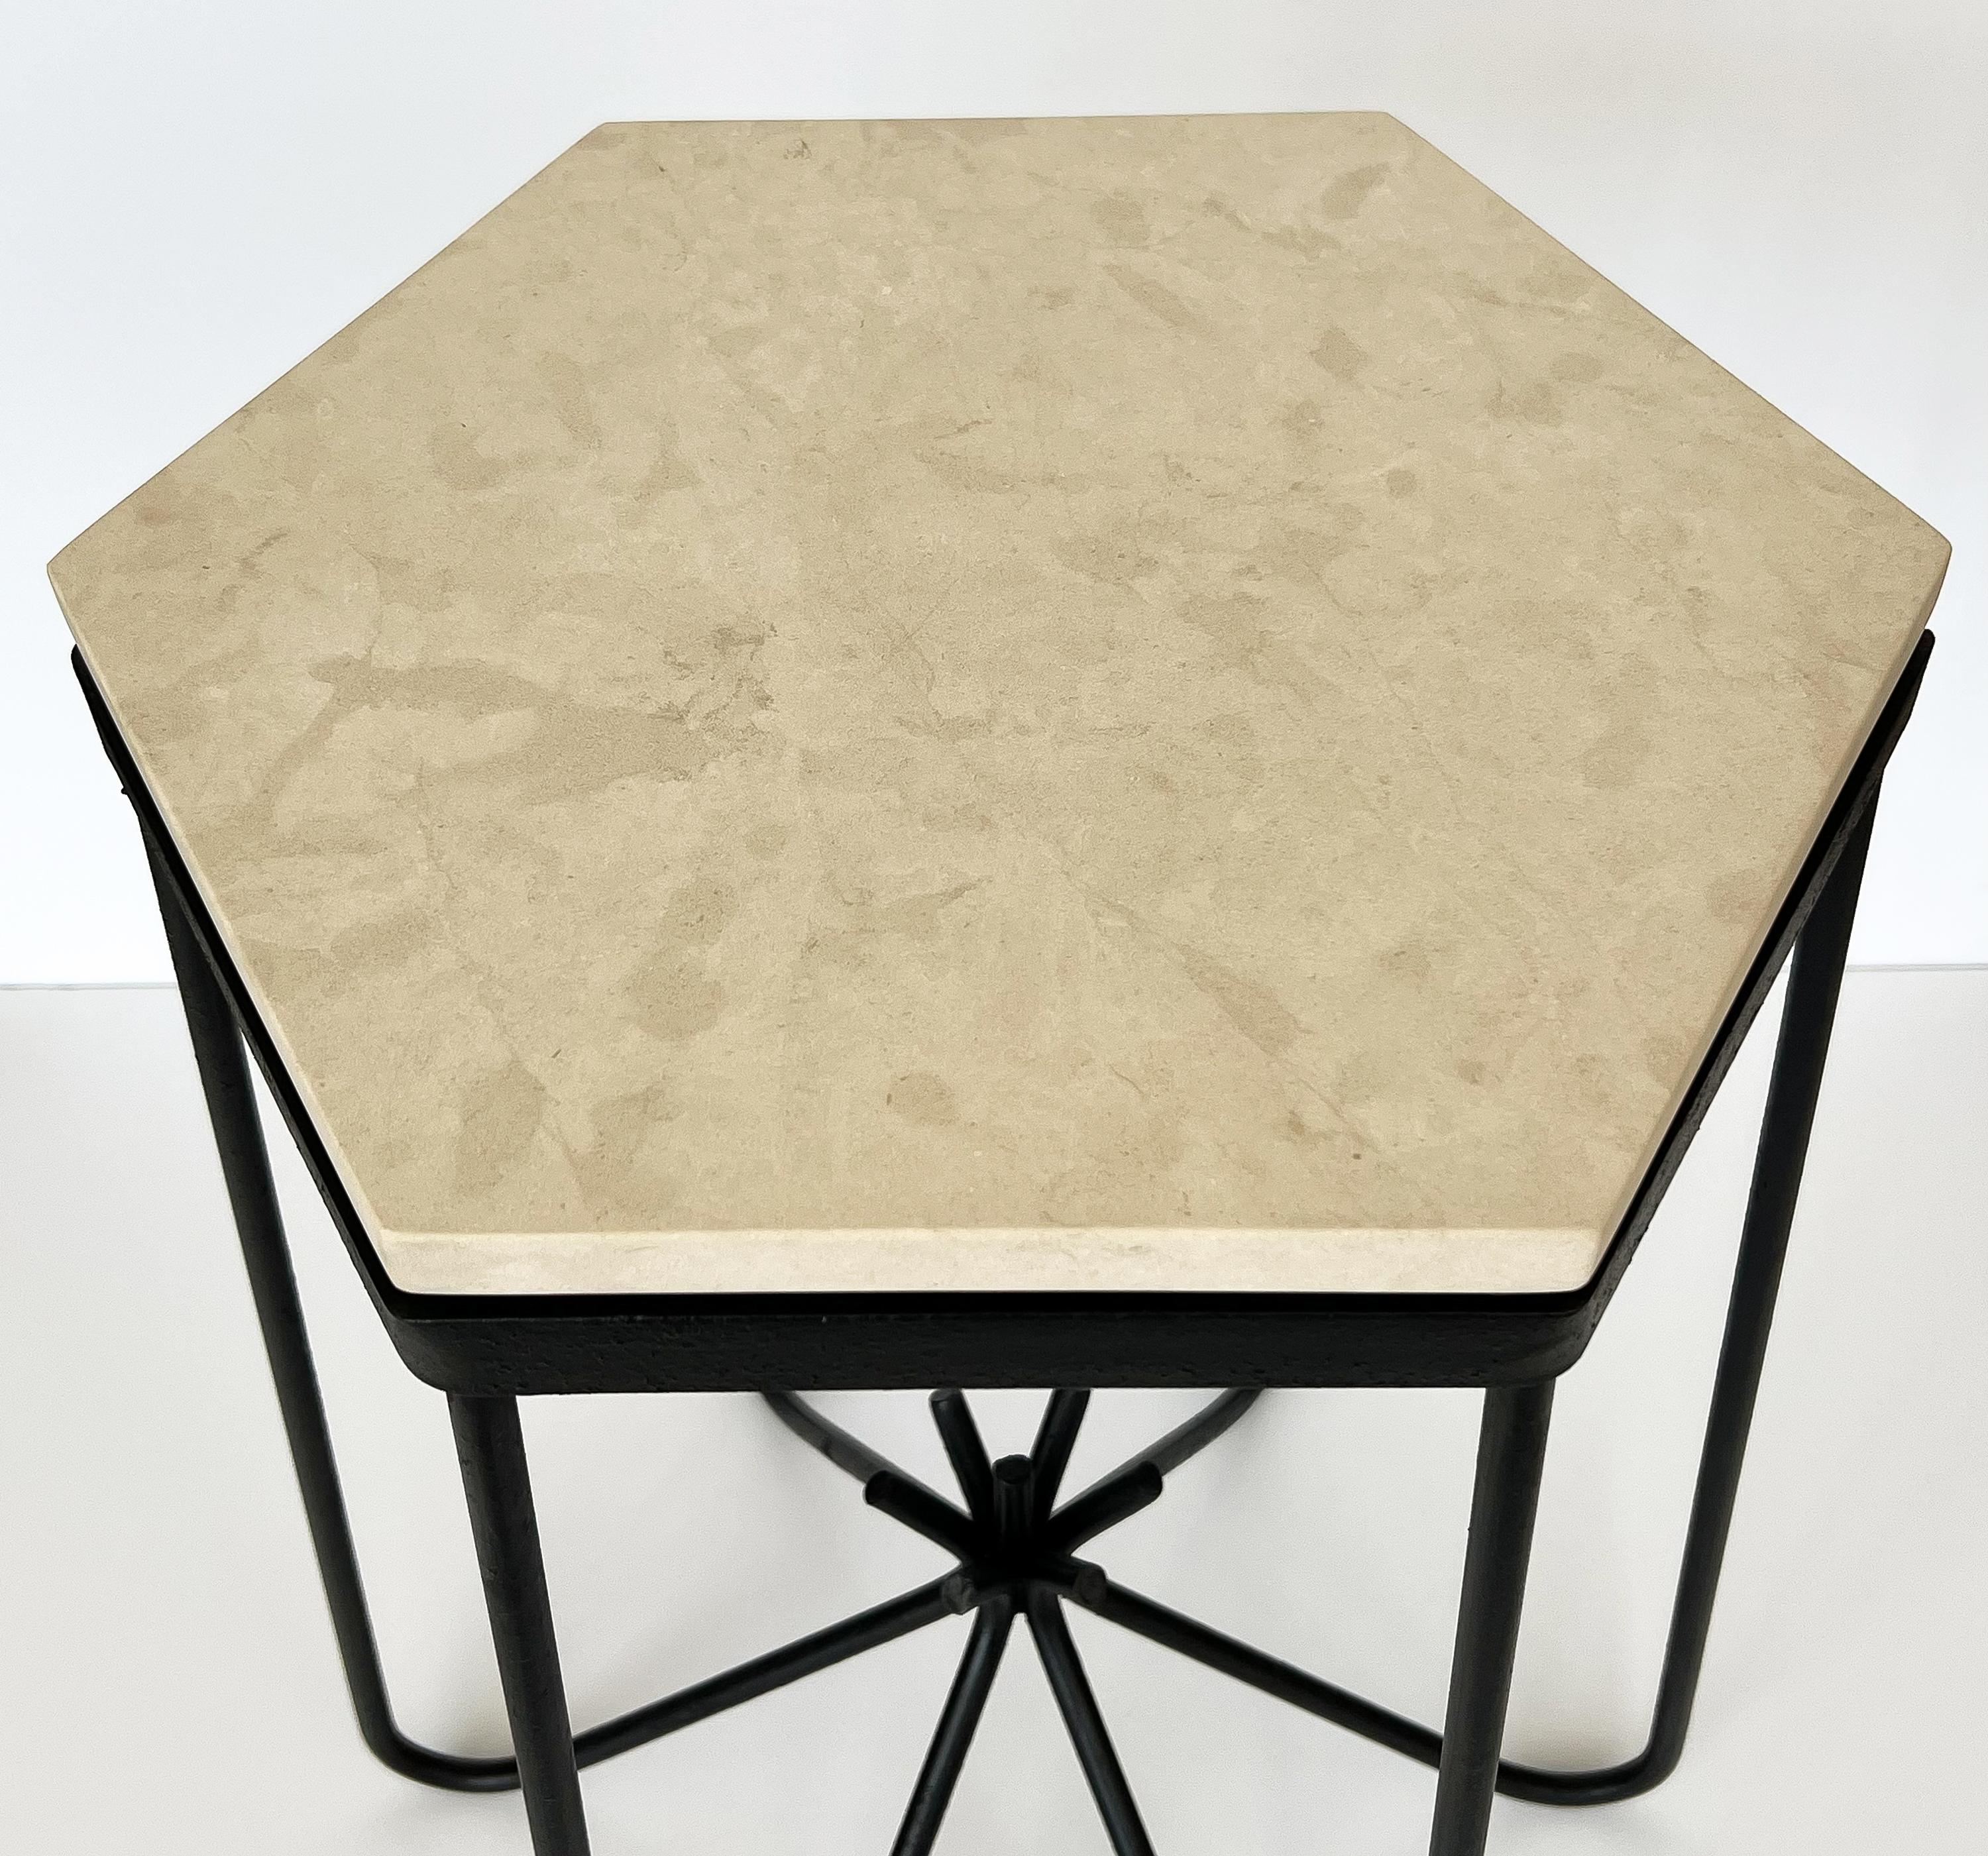 Blackened Hirondelle Side Table in the Style of Jean Royère